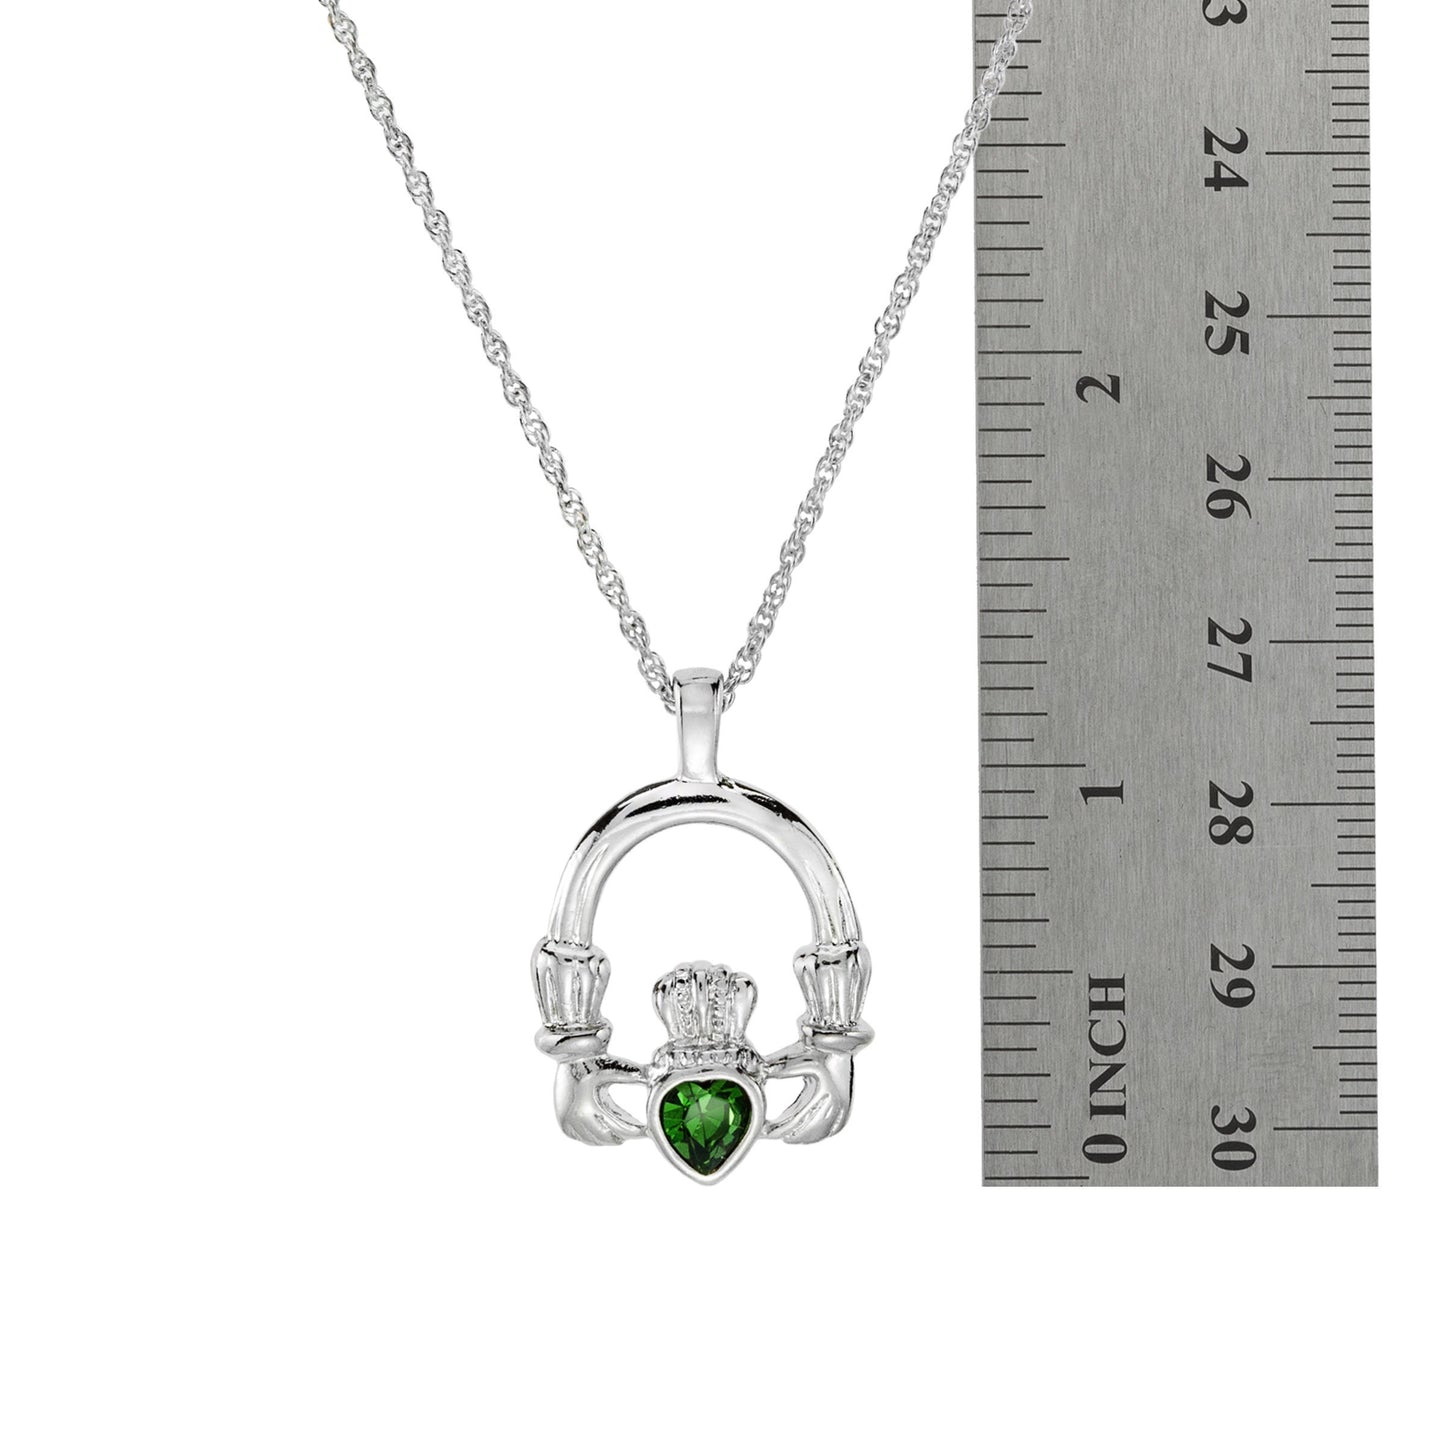 Vintage Claddagh Necklace Green Tourmaline Swarovski Heart Crystal 18k White Gold Silver Made in the USA N3099